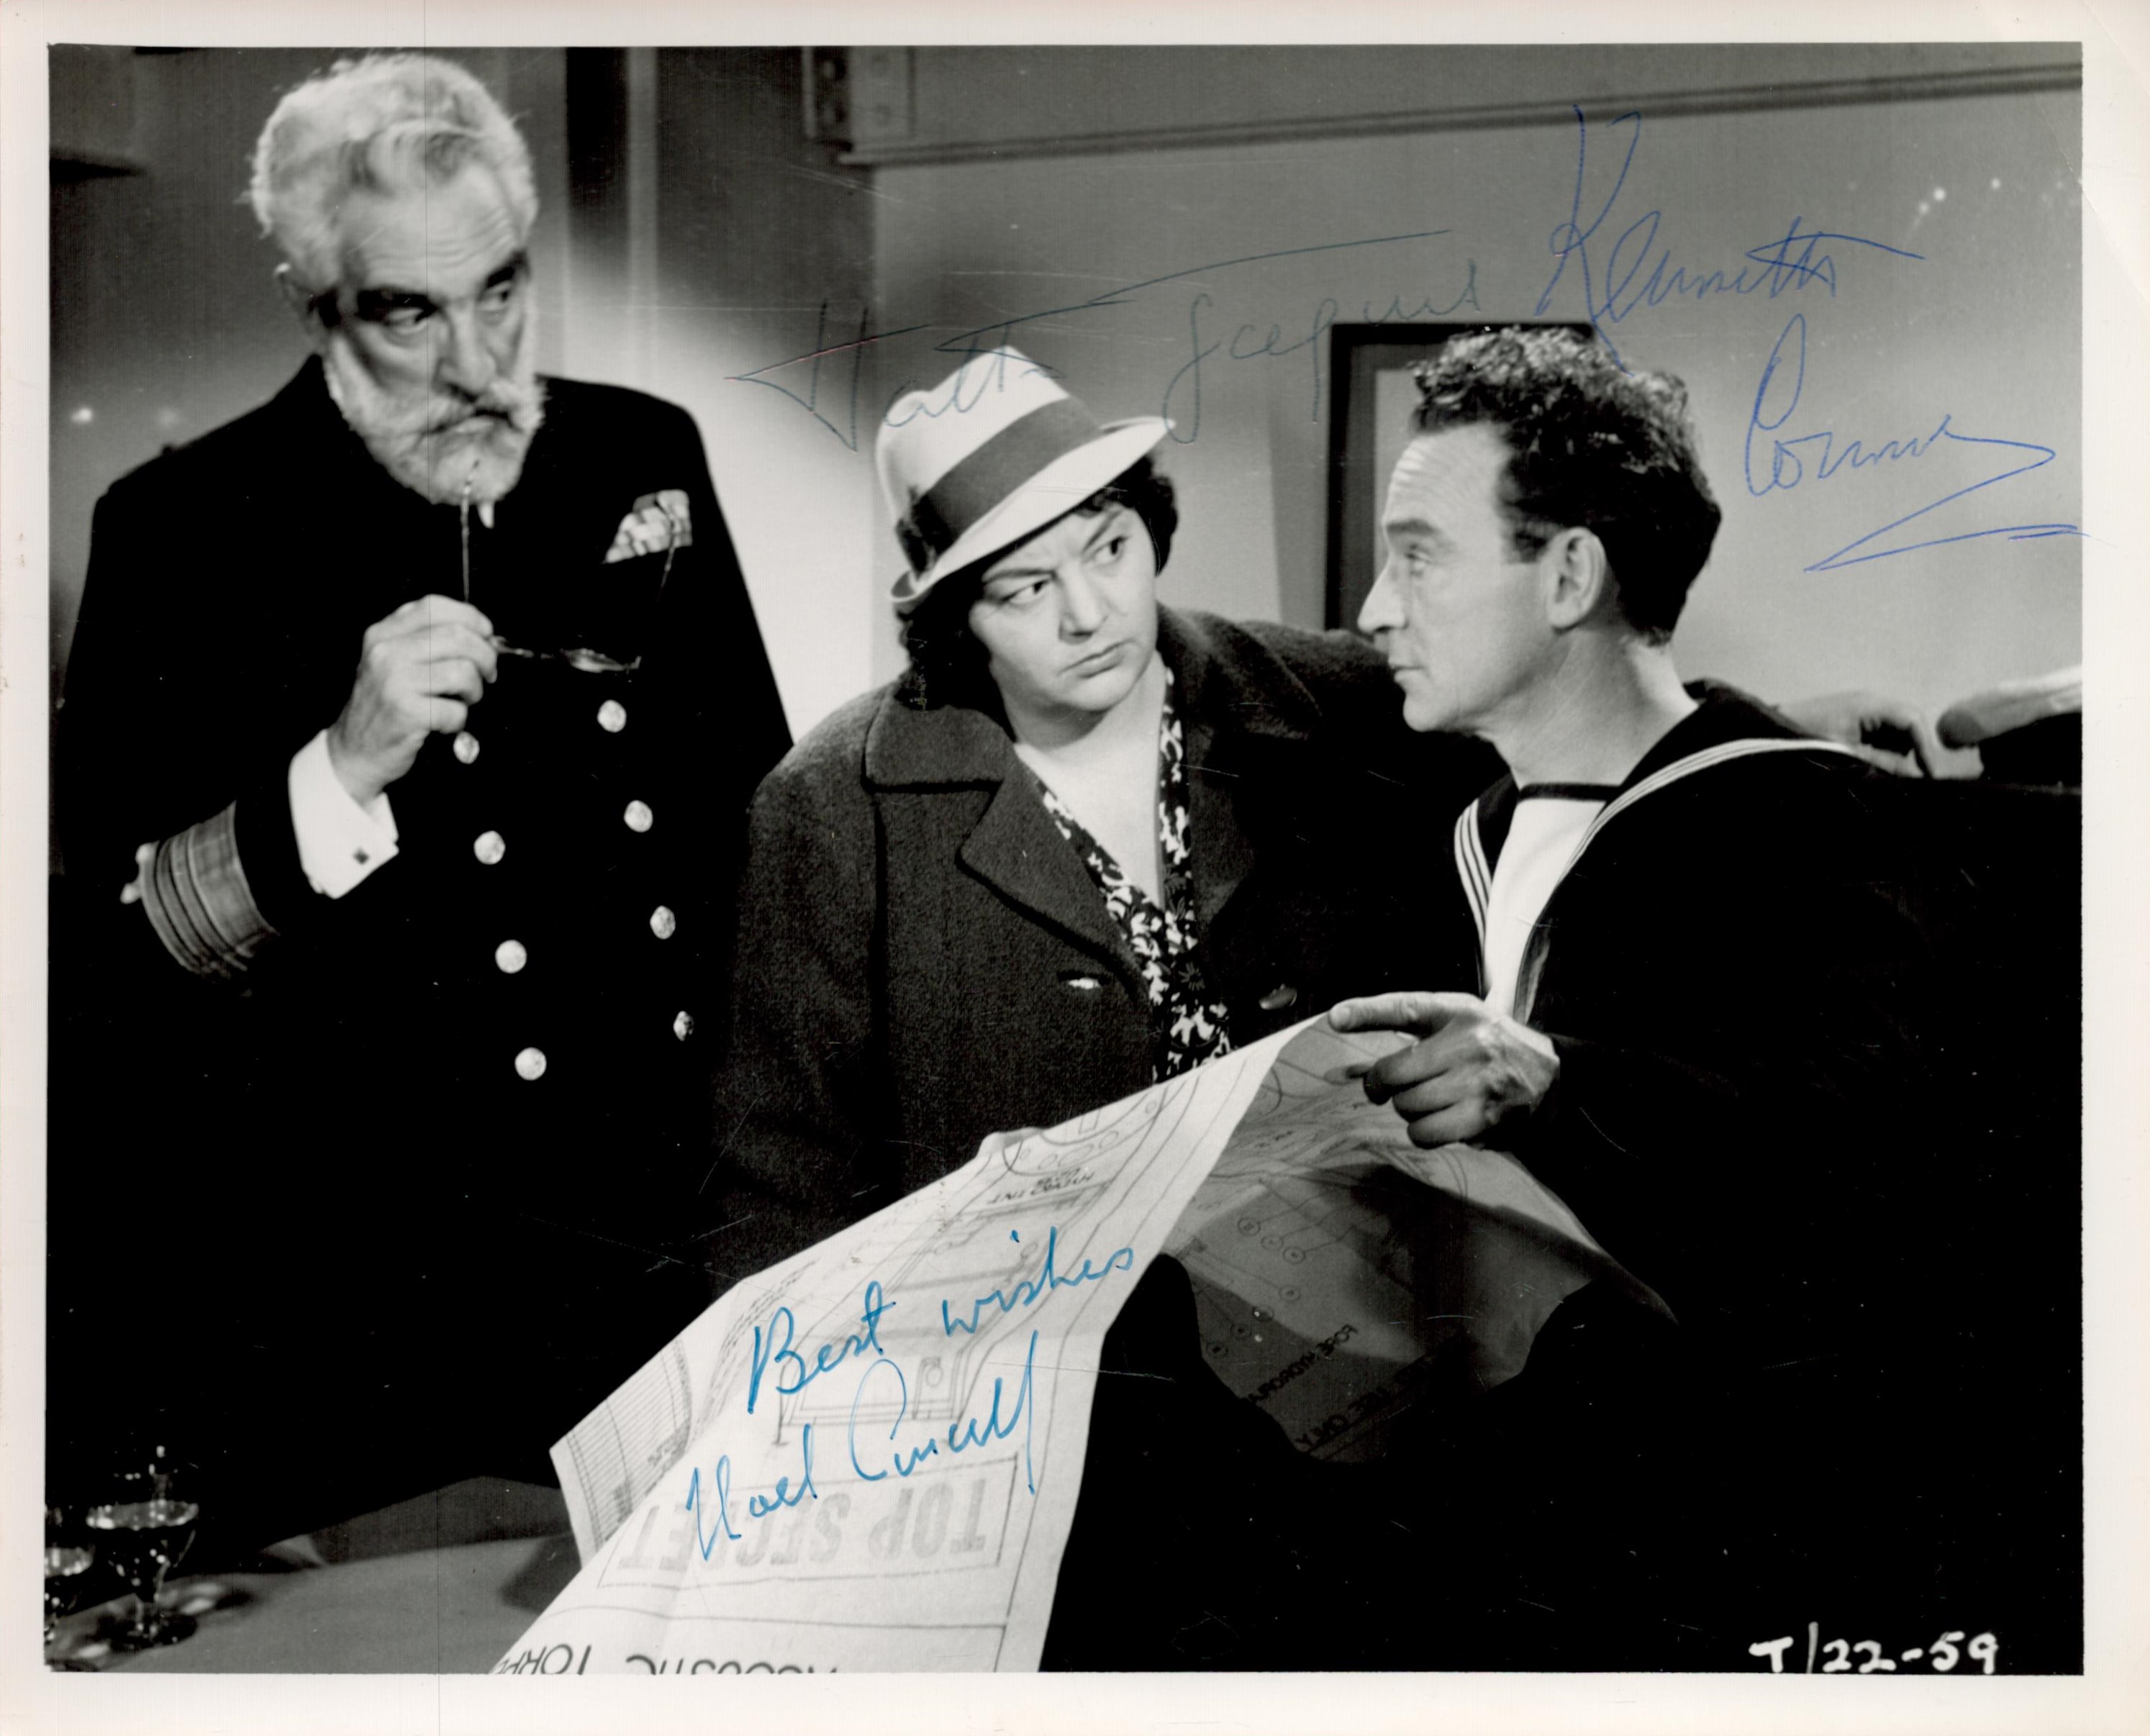 Watch Your Stern (1960), a signed 10x8 film photo. Signed by actors Hattie Jacques as Agatha Potter,